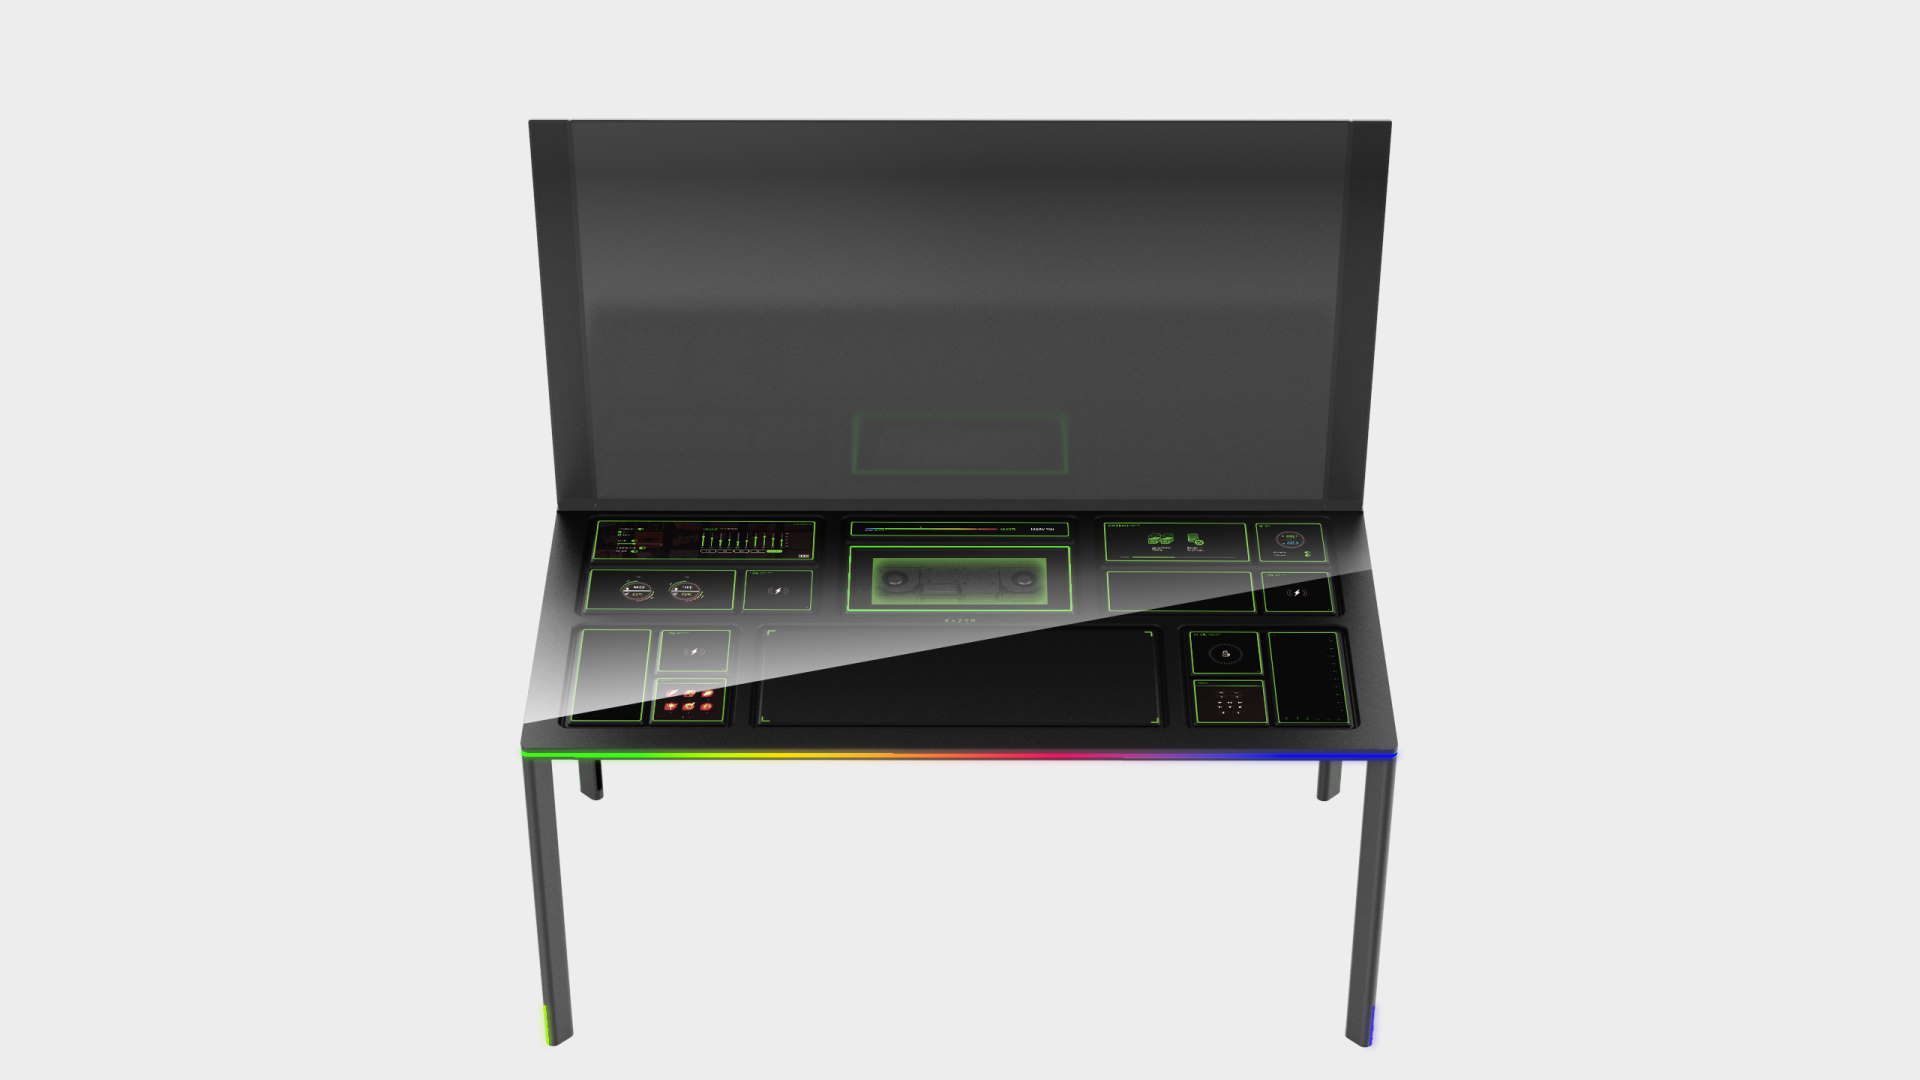 Razer's Modular Desk Concept Looks Like A Massive Gaming Laptop With Legs. And I've Got To Have It thumbnail